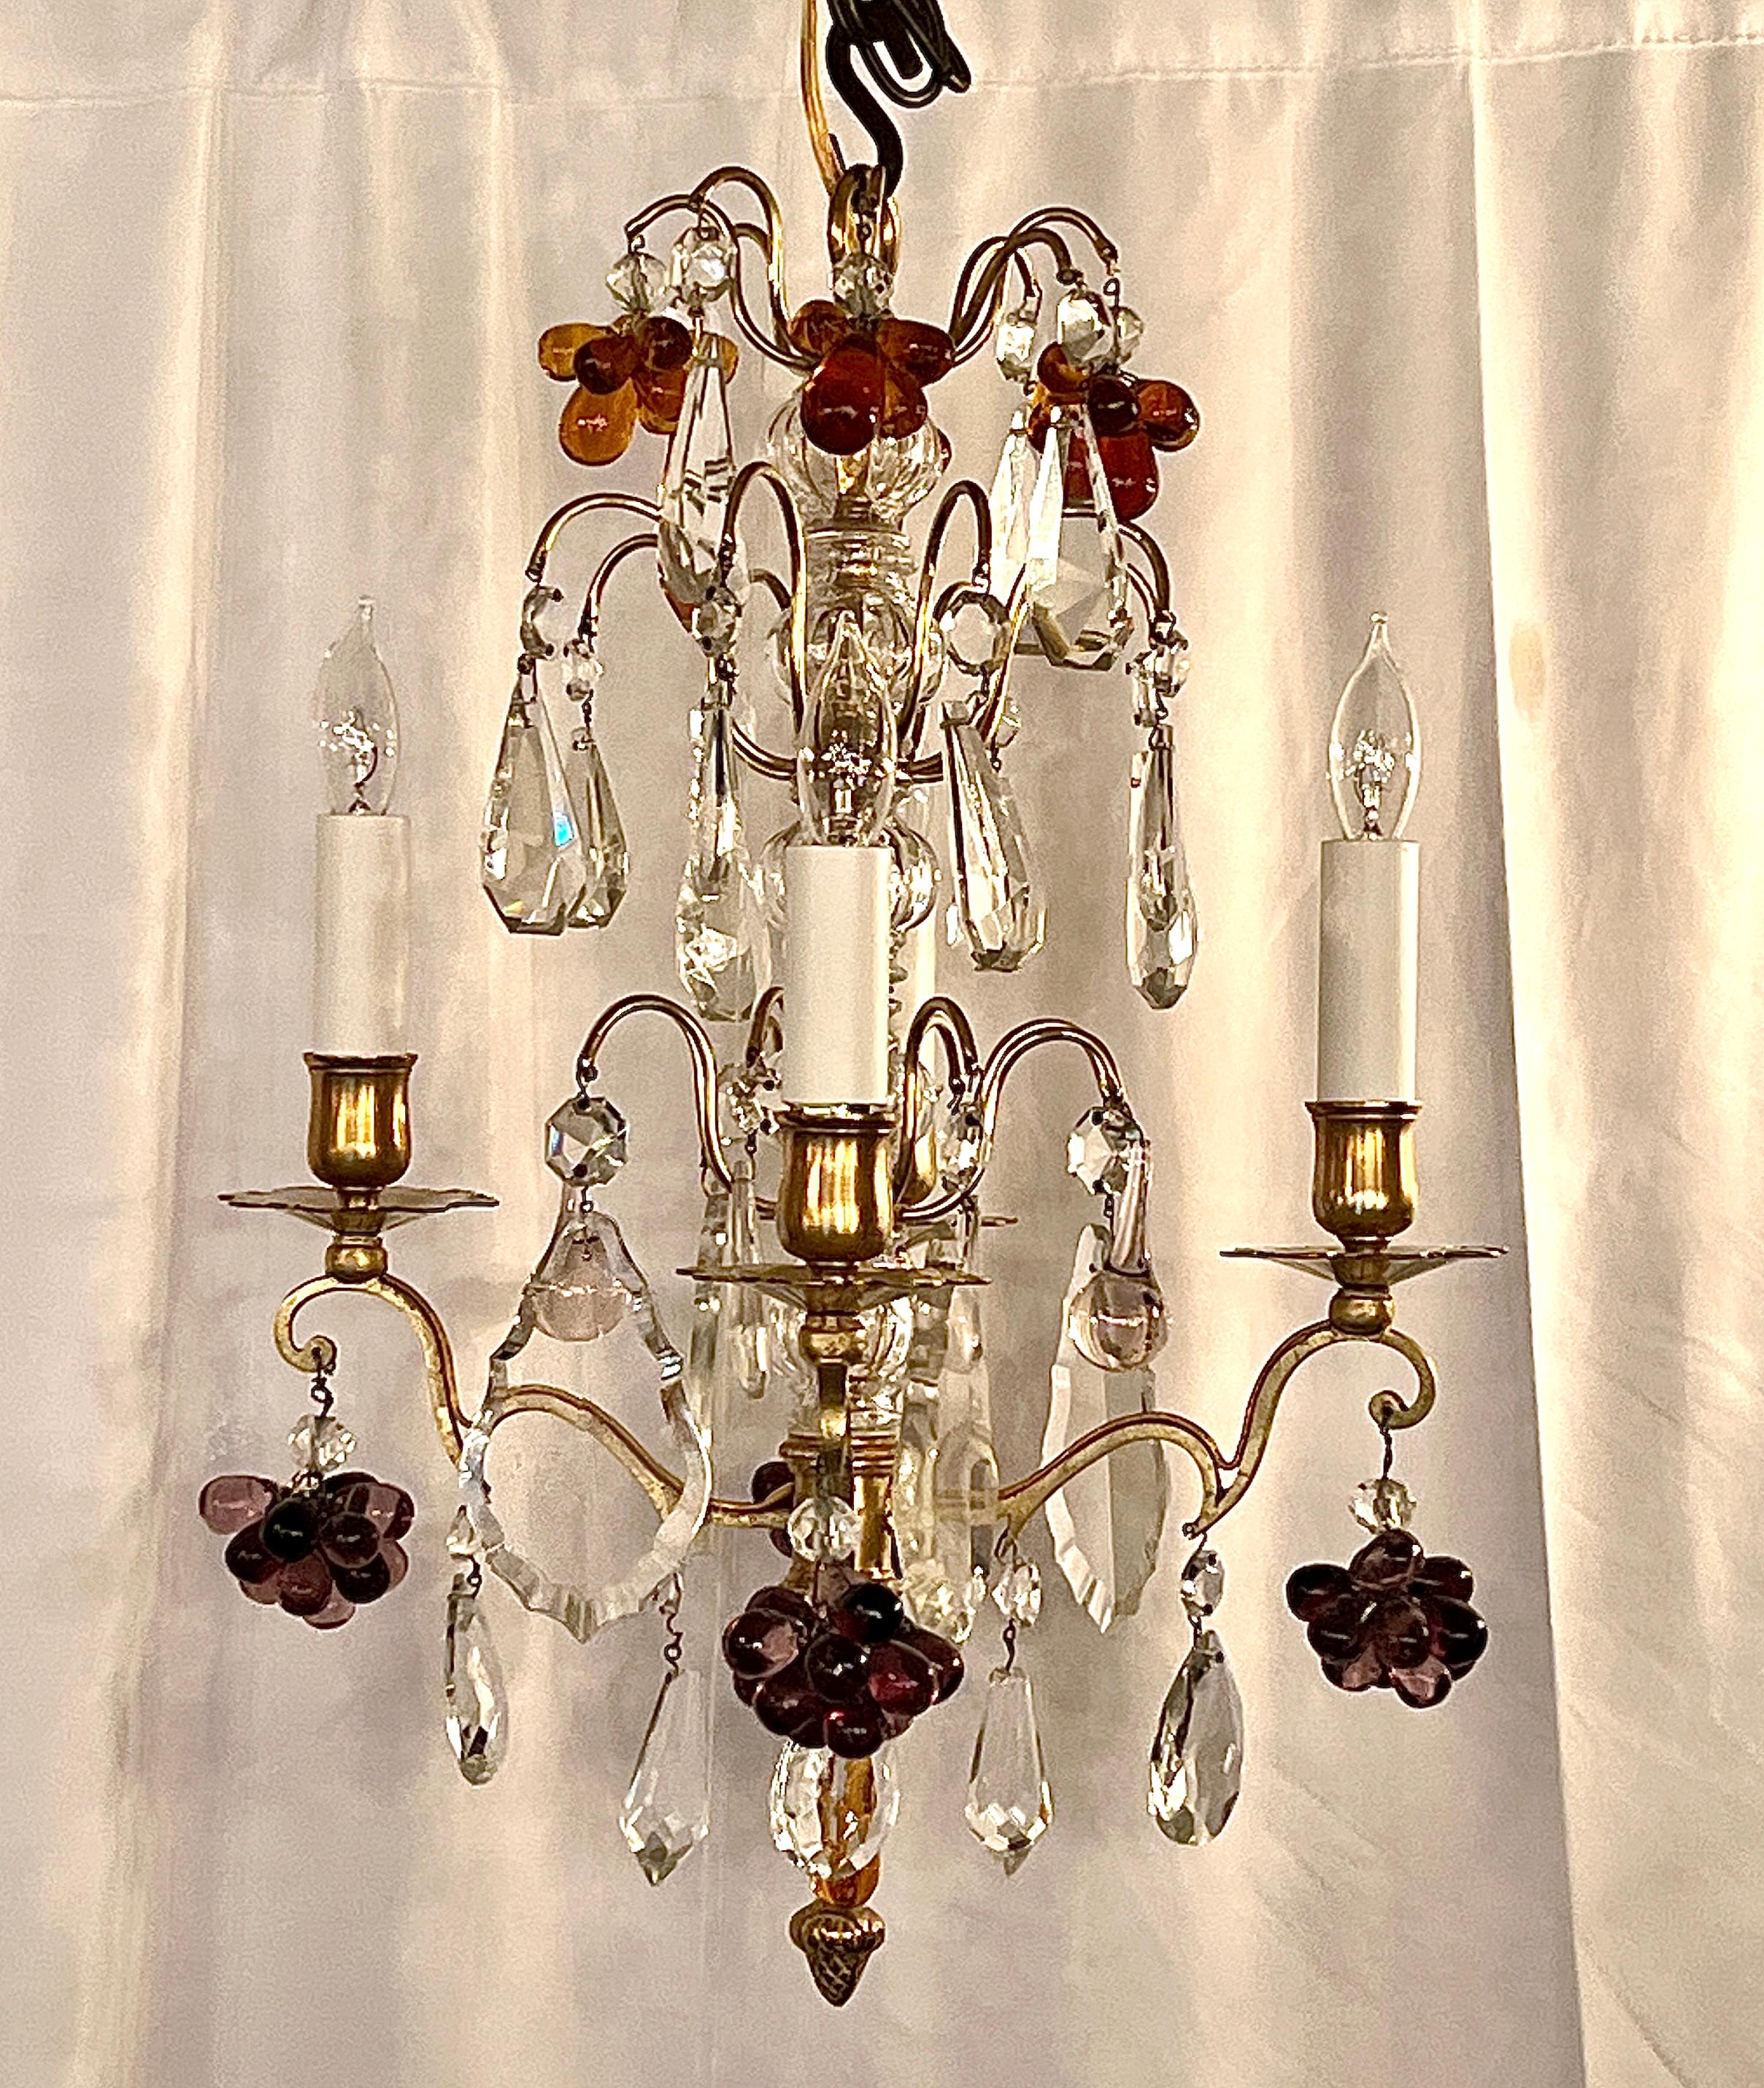 Pair Antique French Baccarat Crystal & Bronze D'ore Chandeliers, Circa 1890's
Sweet and Petite chandeliers with colored crystals, clear crystals and a cut crystal stem on a gold bronze frame.
